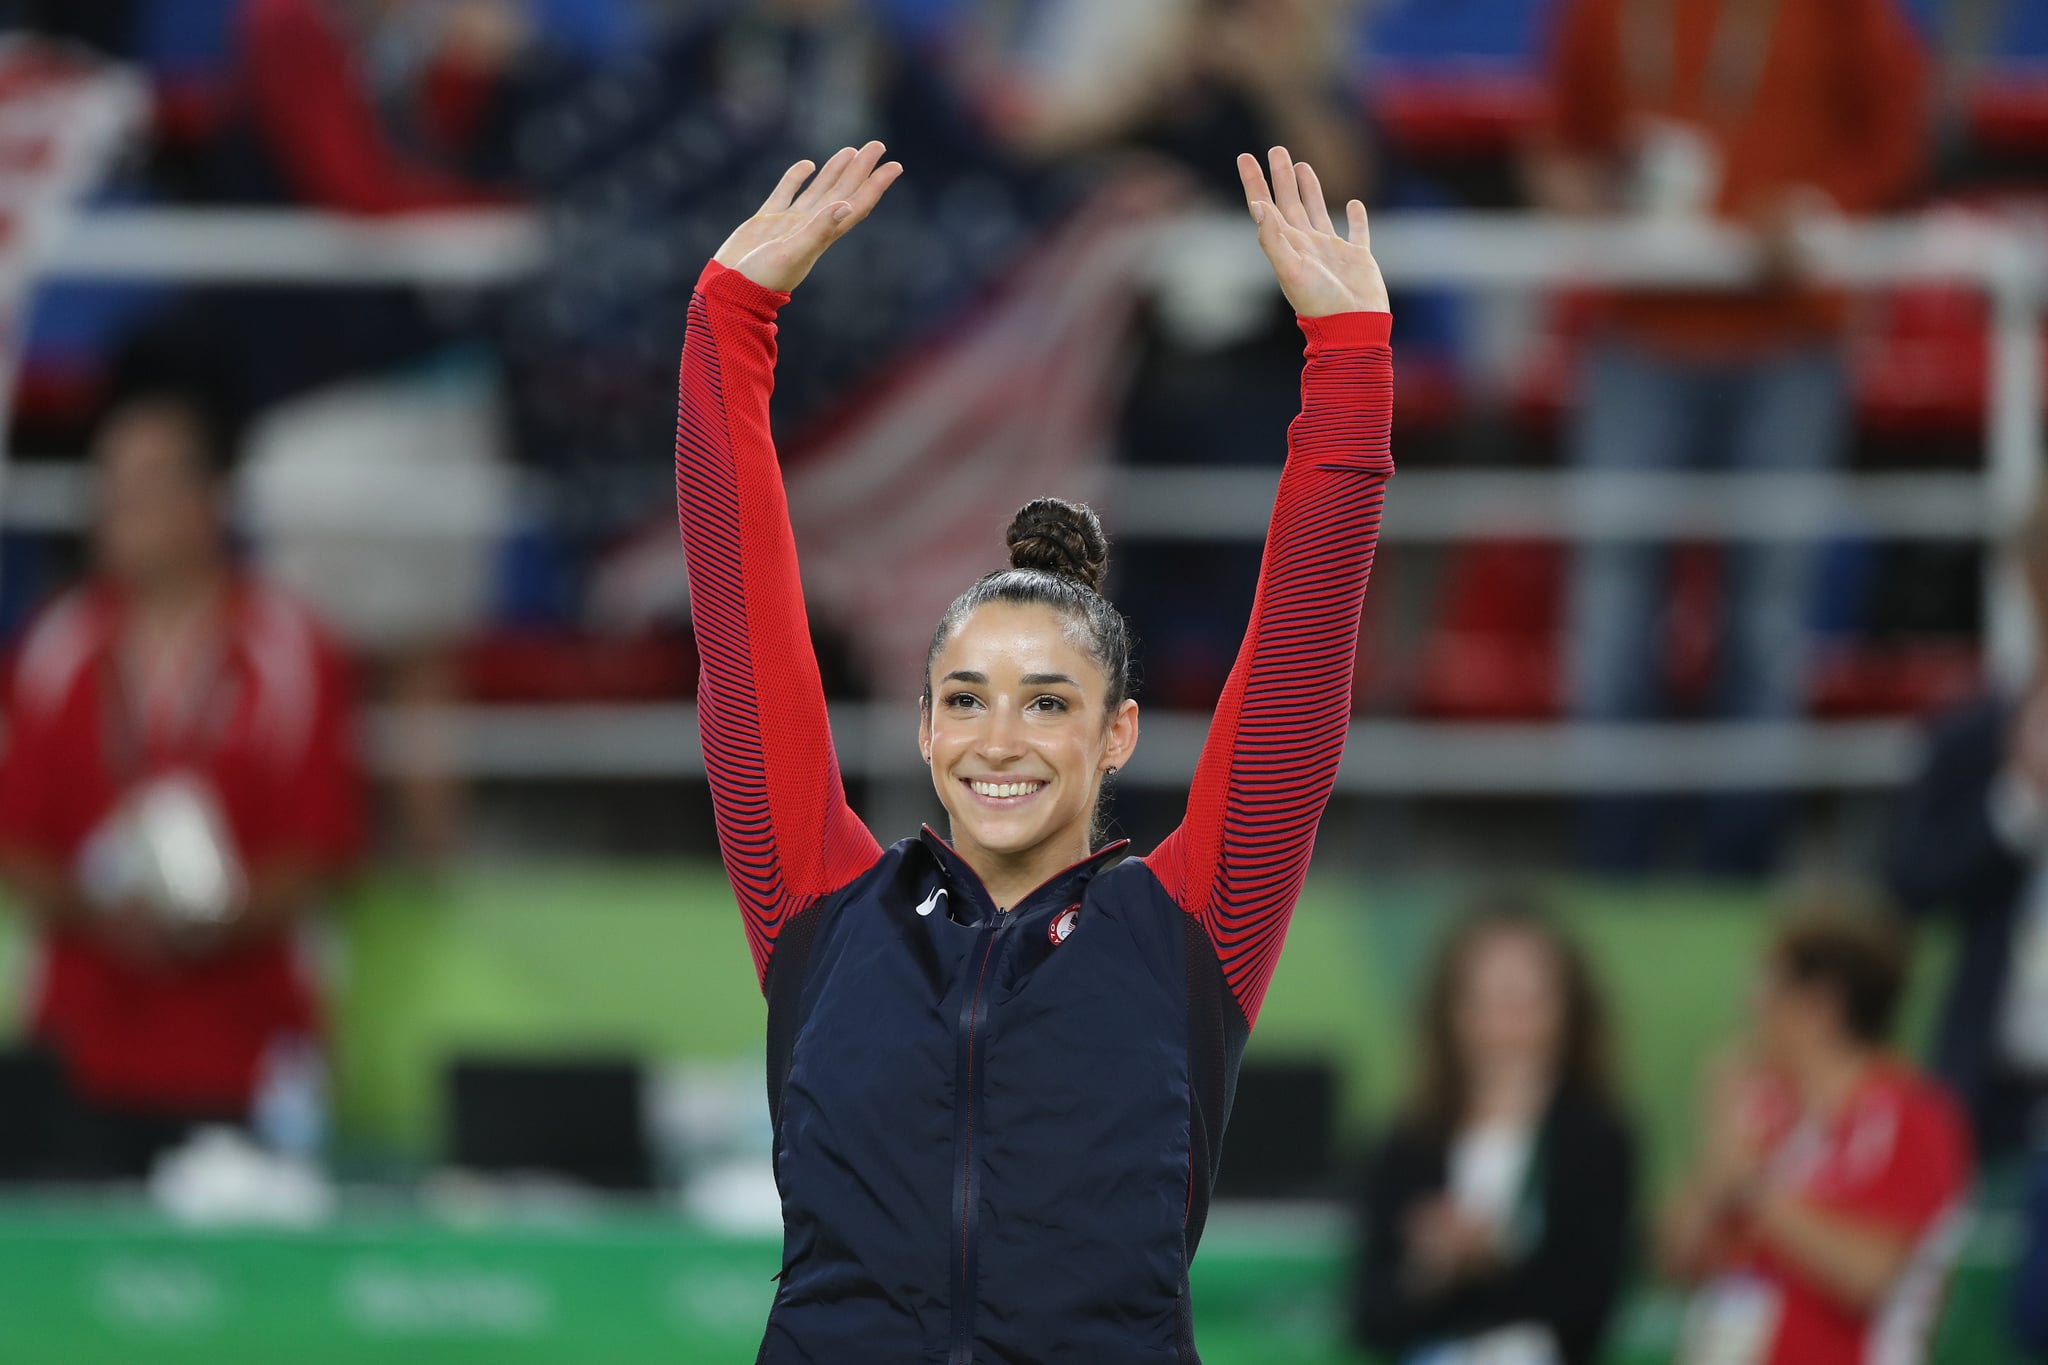 Gymnastics - Olympics: Day 6  Alexandra Raisman #395 of the United States waves to the crowd on the podium before receiving her silver medal during the Artistic Gymnastics Women's Individual All-Around Final at the Rio Olympic Arena on August 11, 2016 in Rio de Janeiro, Brazil. (Photo by Tim Clayton/Corbis via Getty Images)